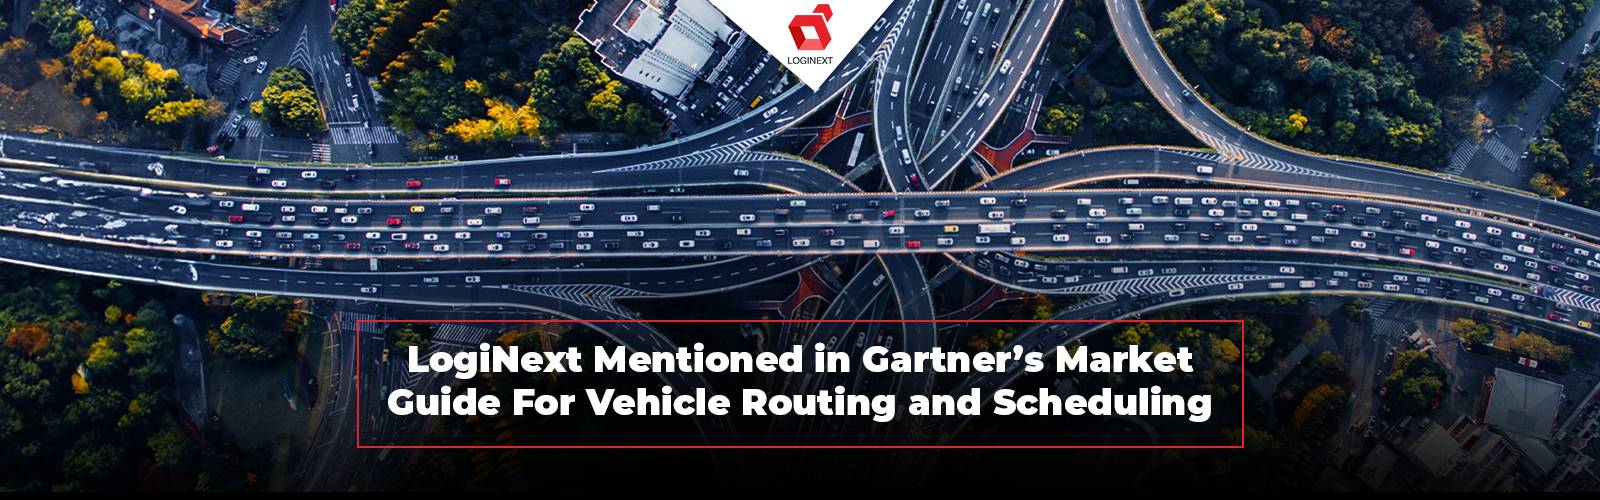 LogiNext mentioned as Vendor Representative in Gartner's Vehicle Routing and Scheduling Market Guide